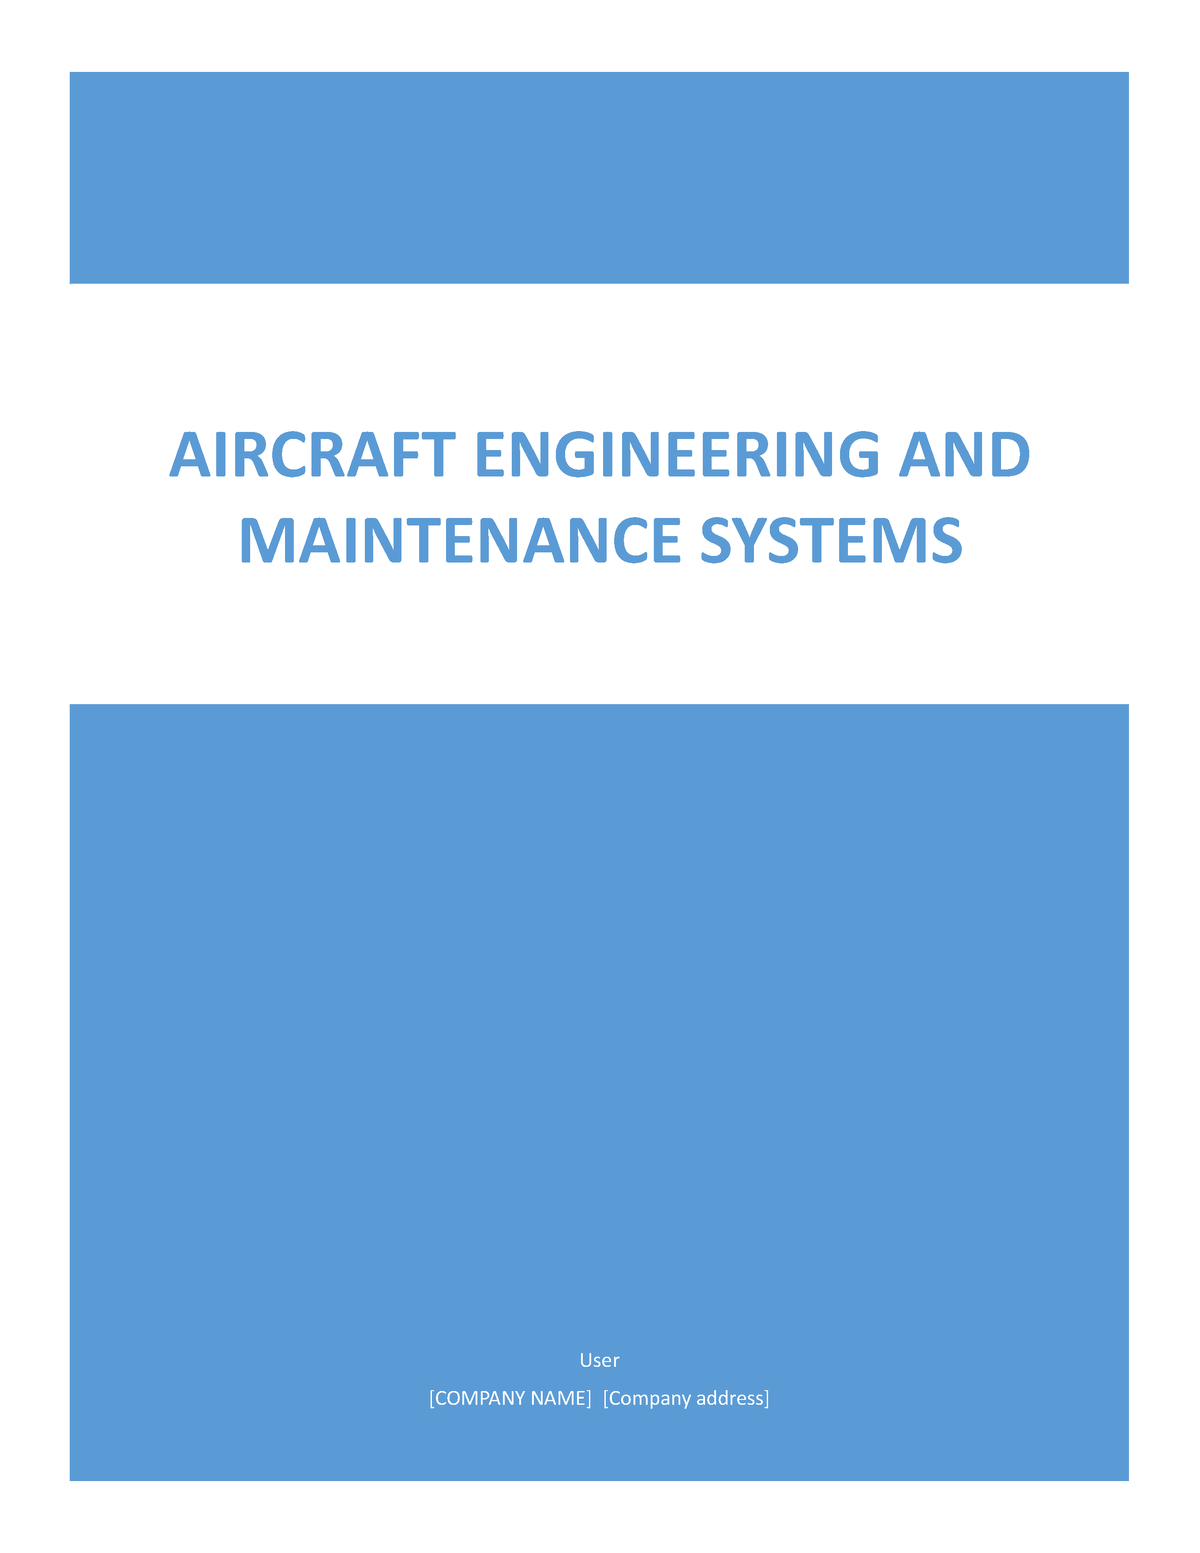 Aircraft Engineering and Maintenance Systems - User [COMPANY NAME ...